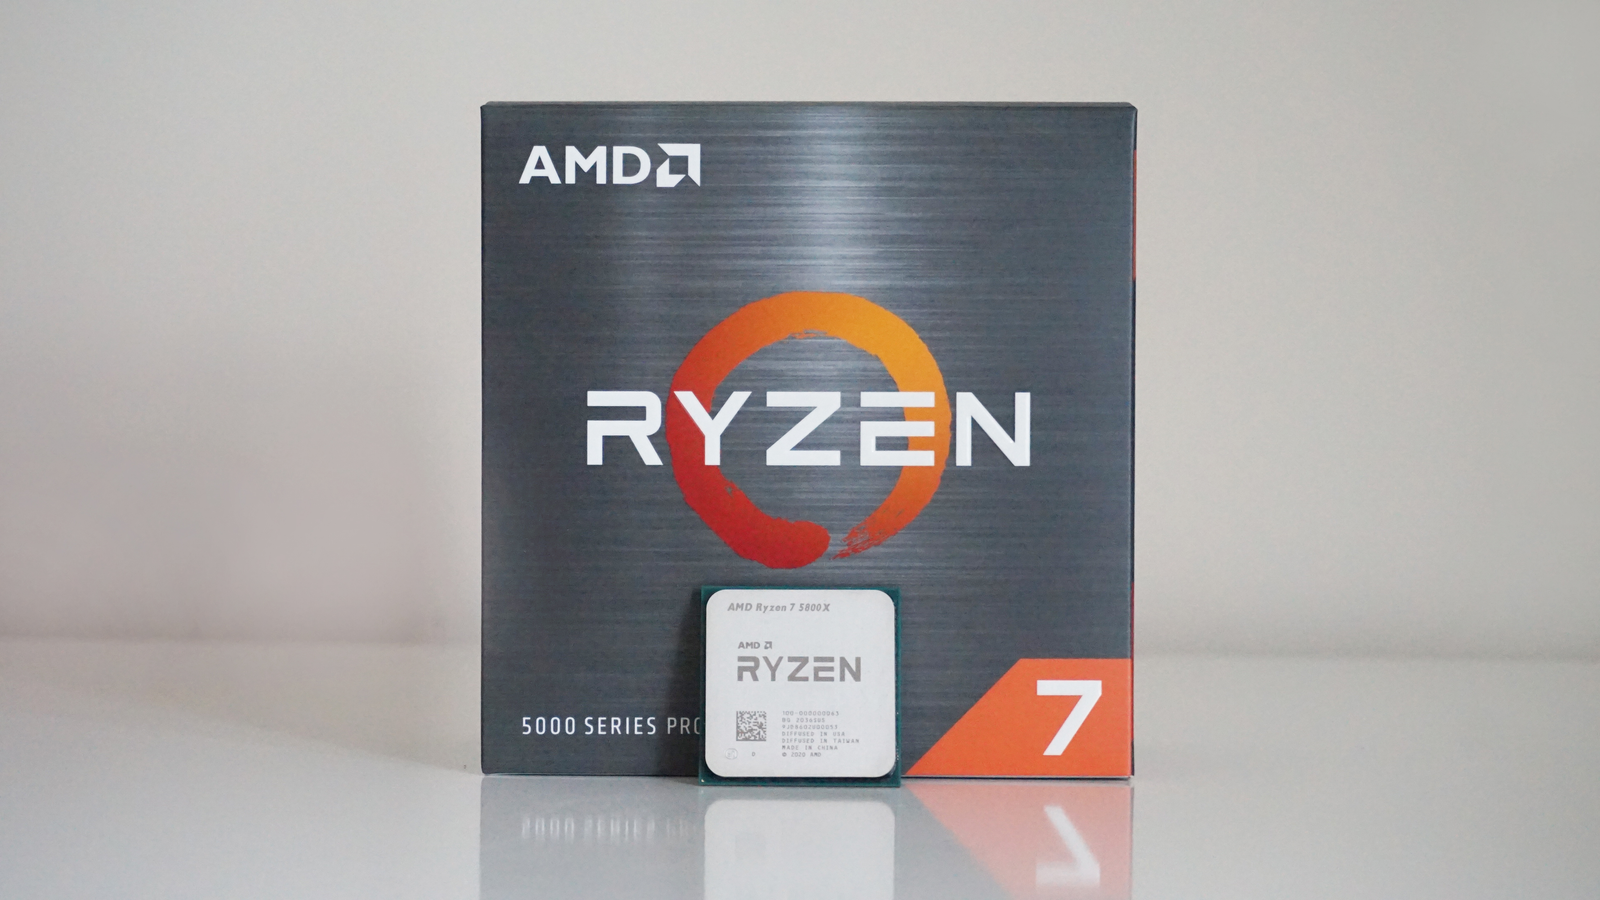 Is the AMD Ryzen 7 5800X good for gaming?